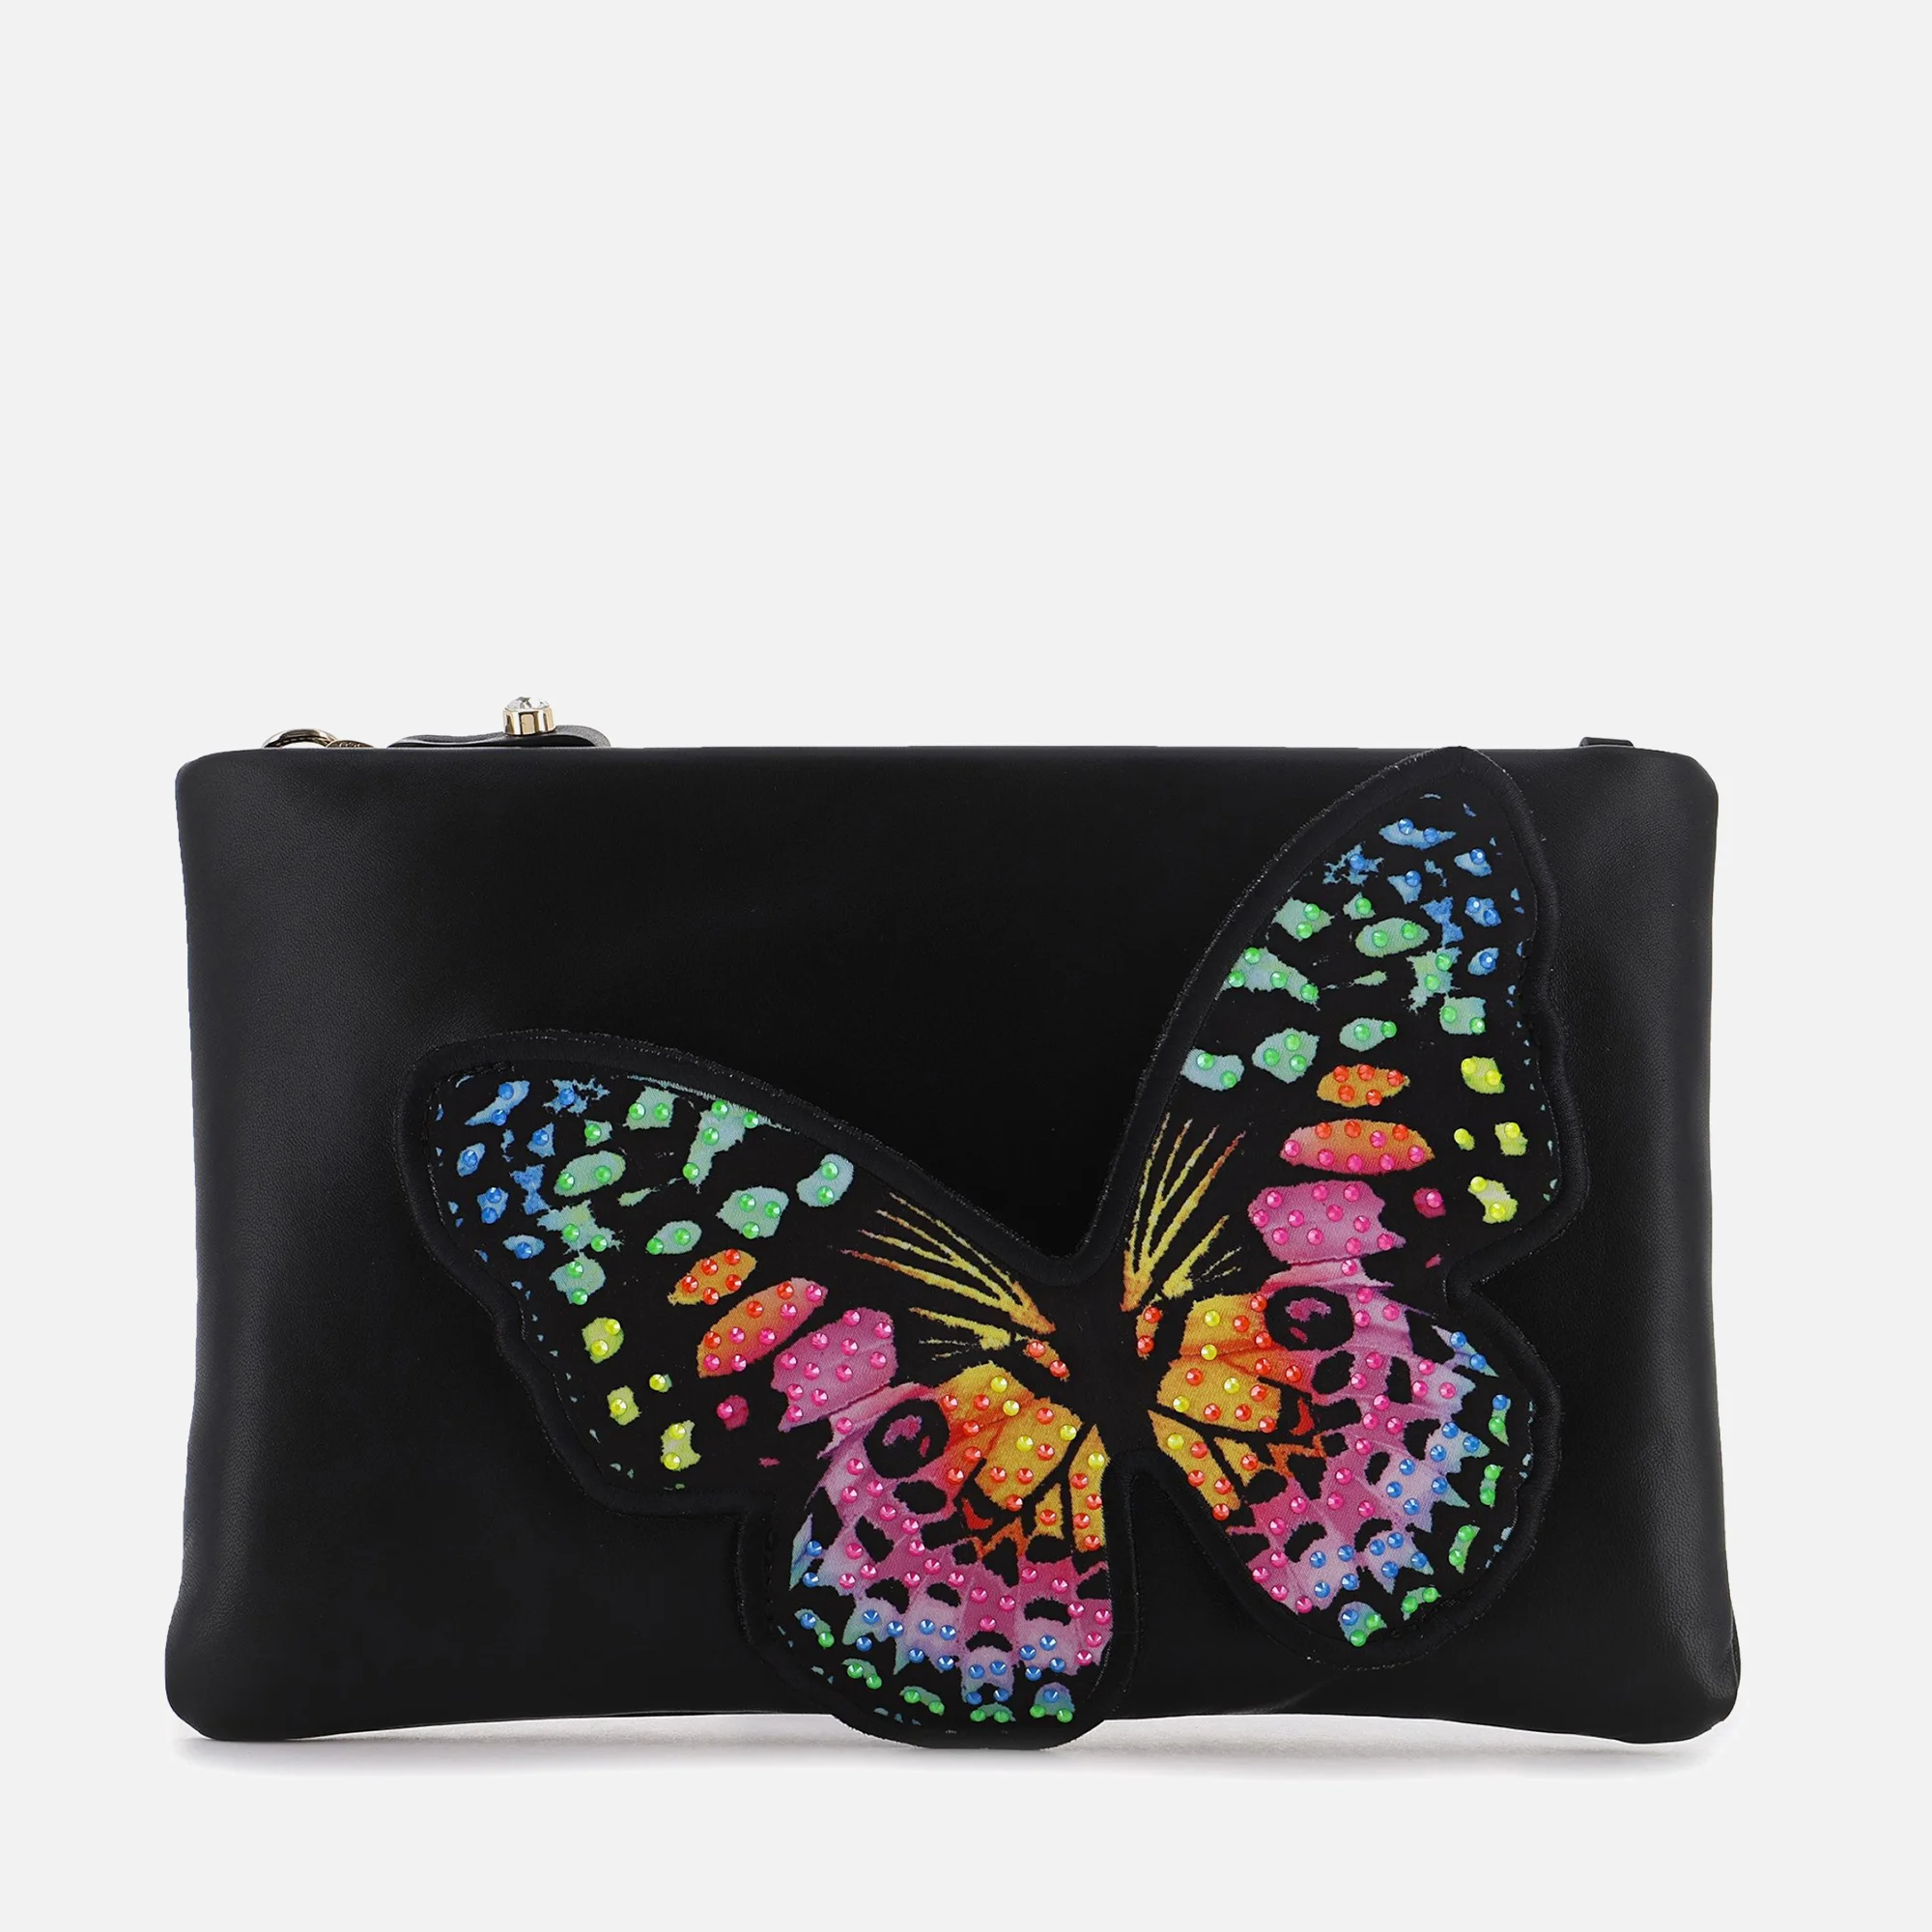 Sophia Webster Flossy Butterfly Leather Clutch Bag Image 1